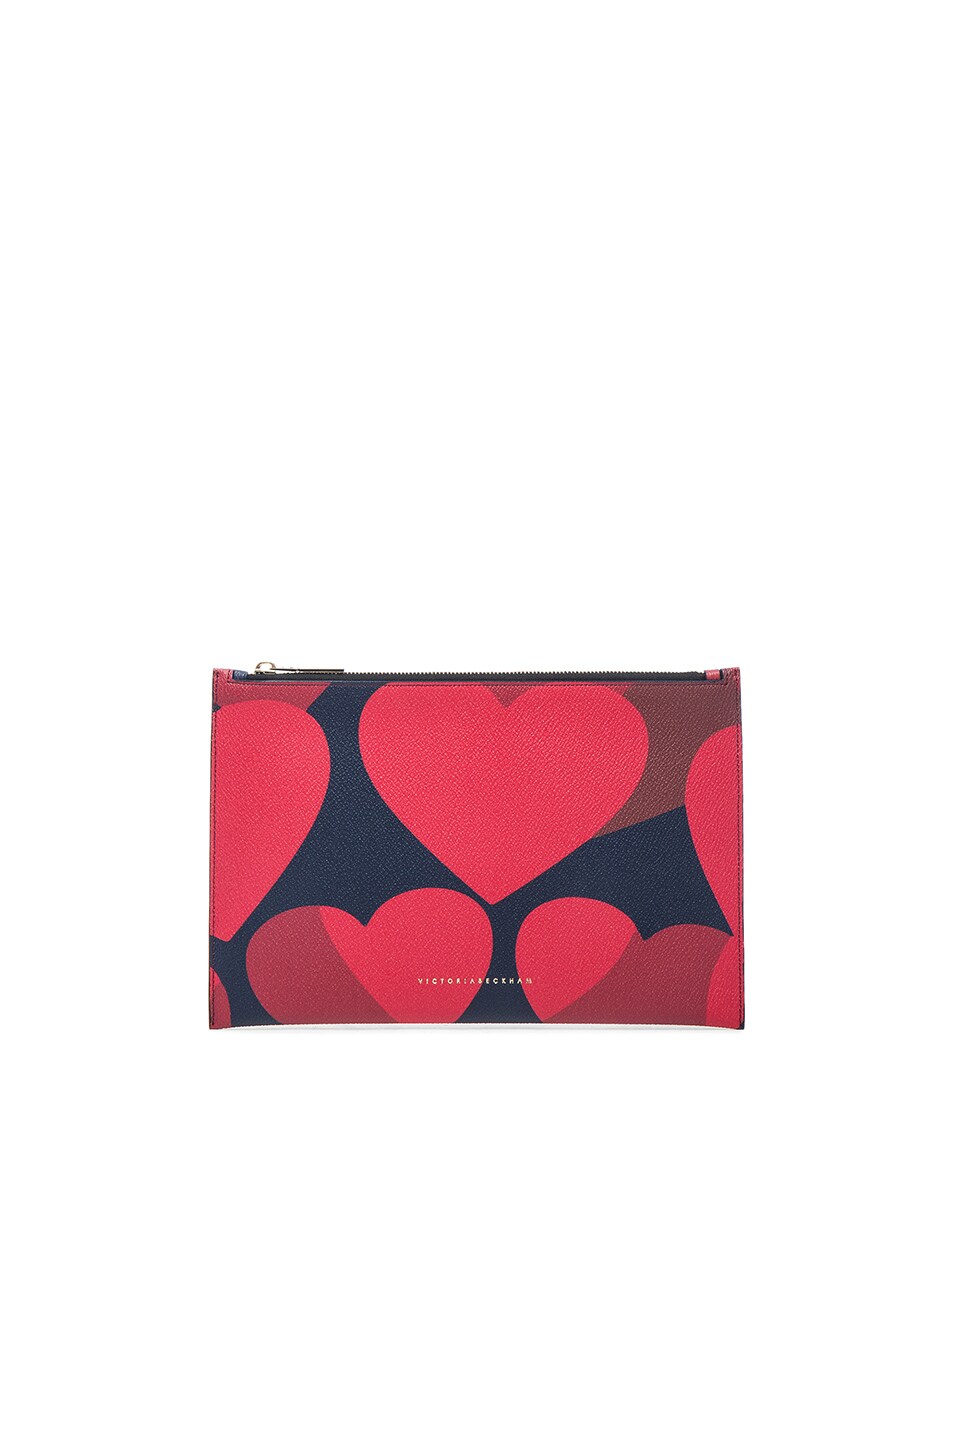 Image 1 of Victoria Beckham Small Simple Pouch in Hearts